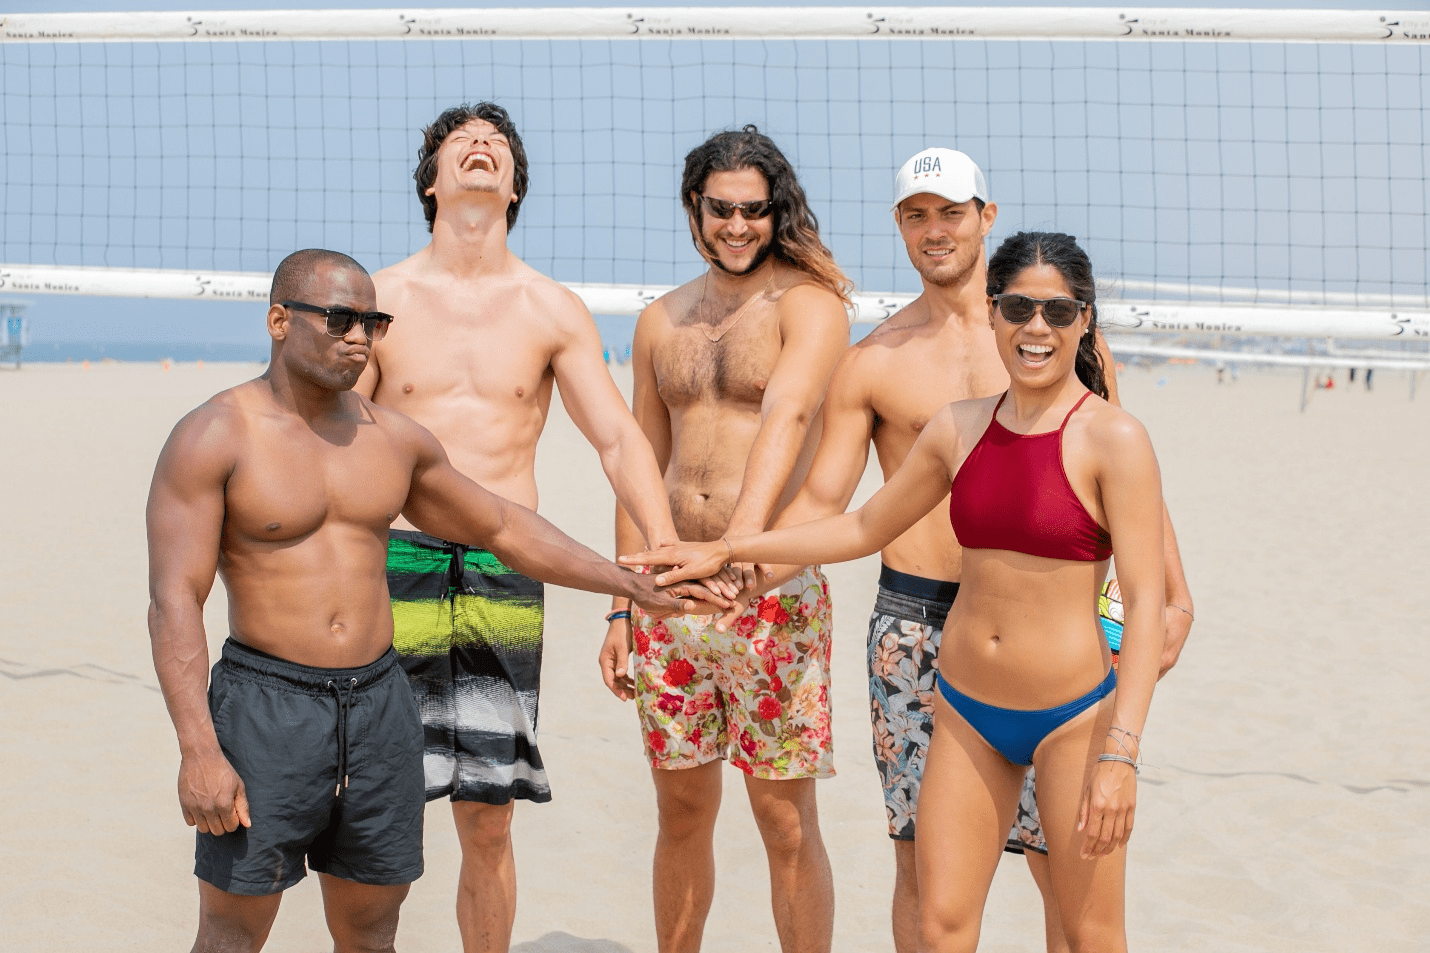 A beach volleyball team putting their hands together